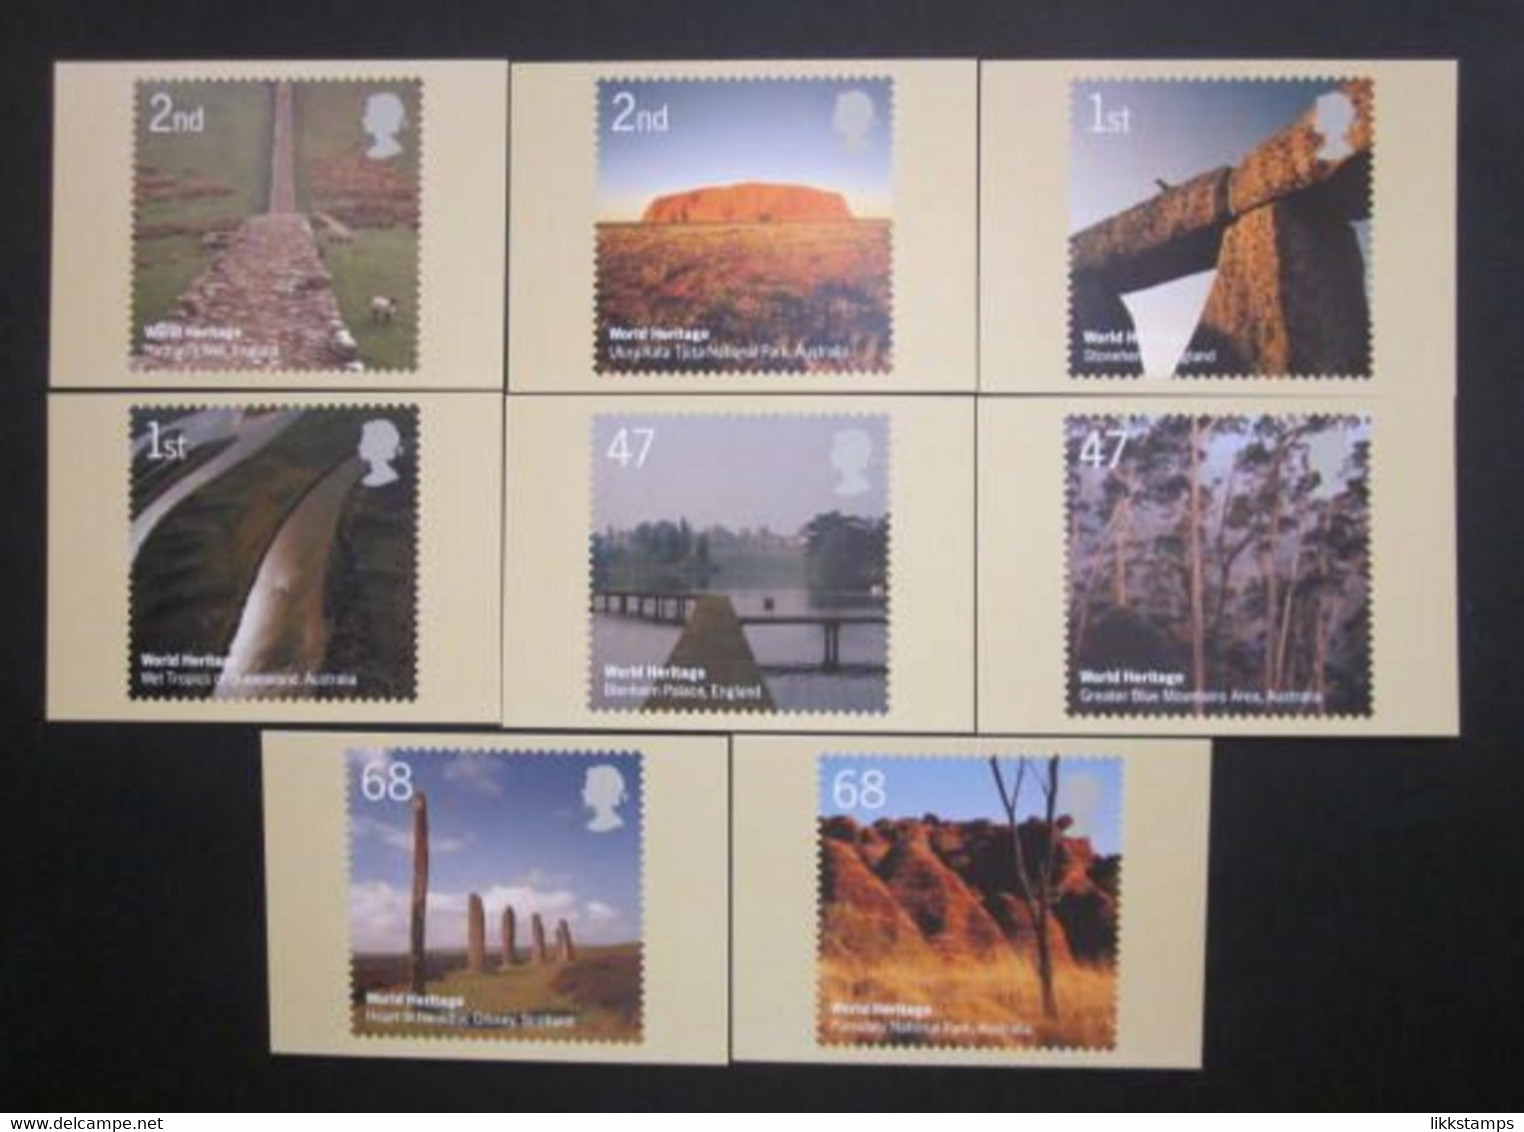 2005 WORLD HERITAGE SITES P.H.Q. CARDS UNUSED, ISSUE No. 275 (B) #00843 - PHQ Cards